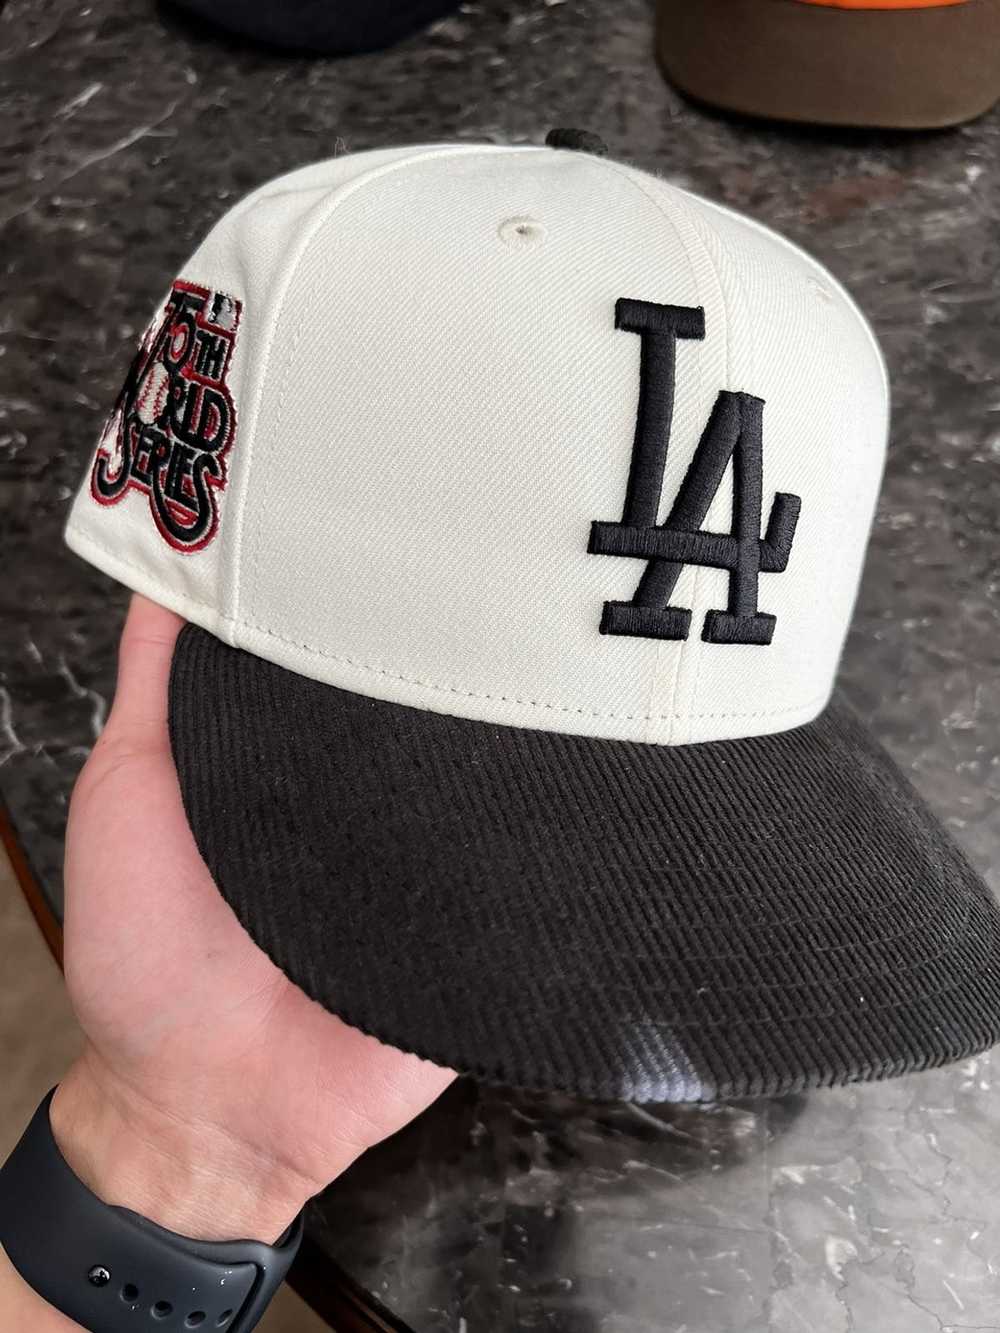 Los Angeles Dodgers 4th Of July Shirt - Listentee